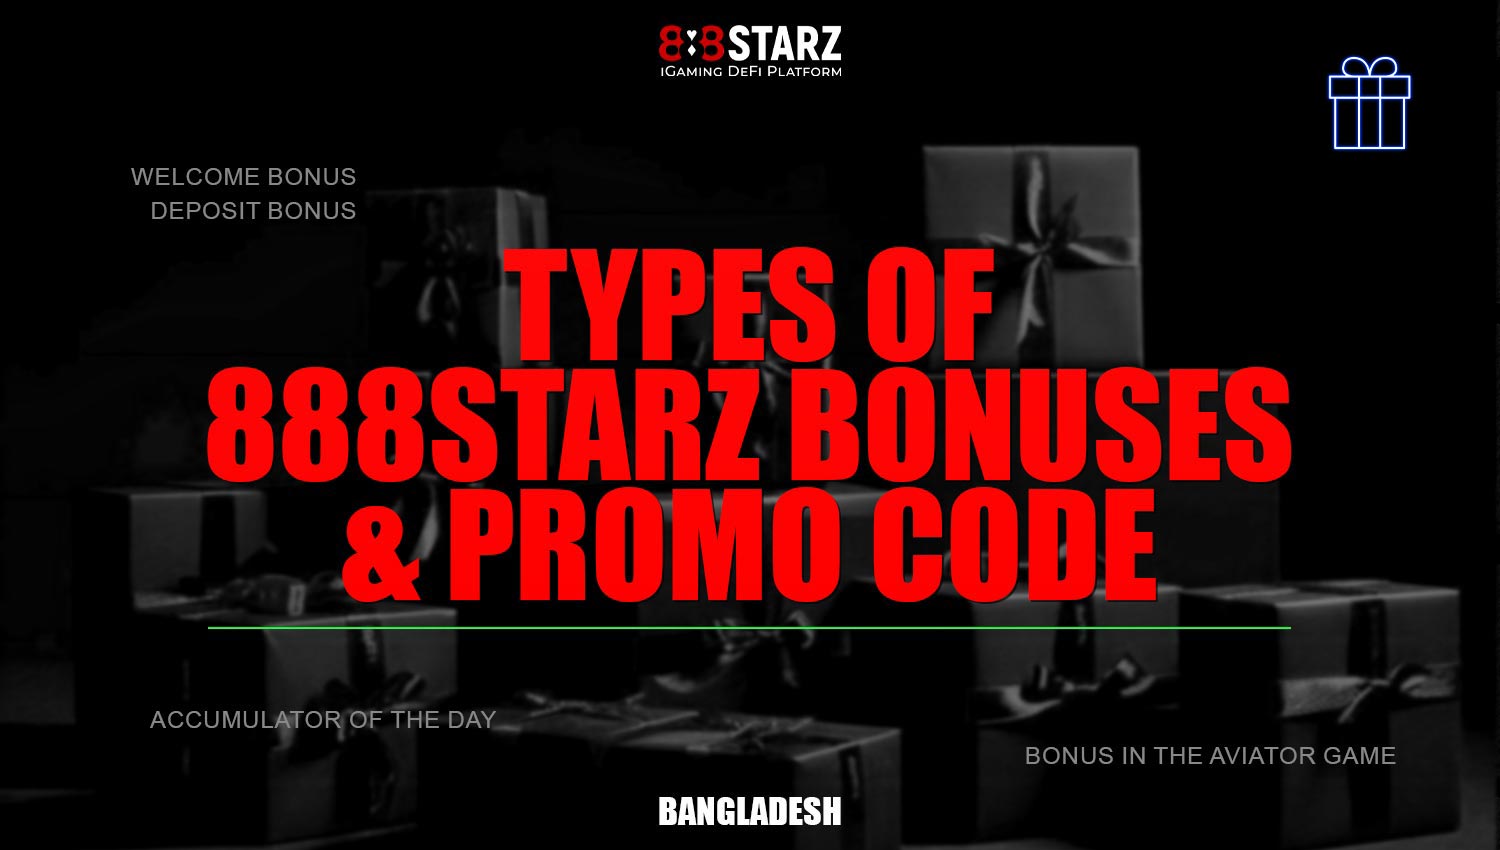 888Starz provides nice bonuses and promo codes for players from Bangladesh.